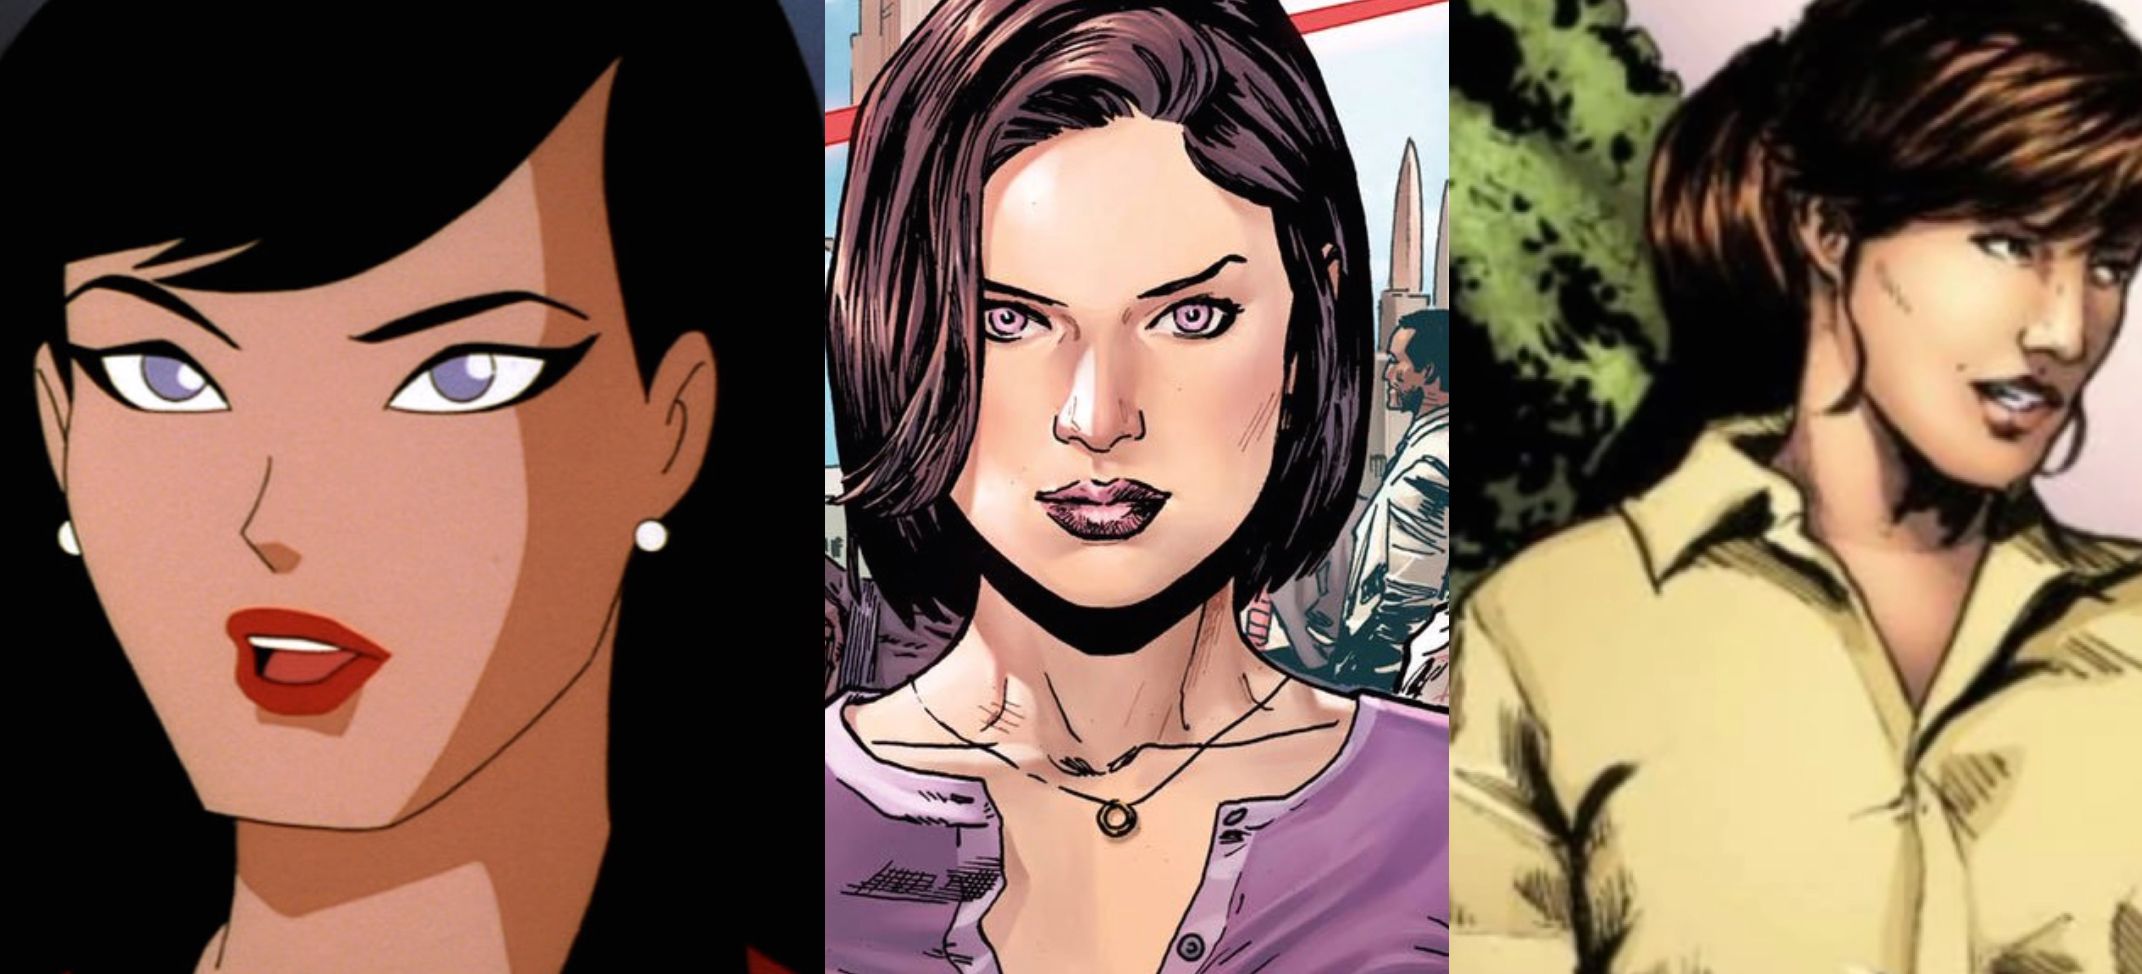 16 Things You Didnt Know About Lois Lane